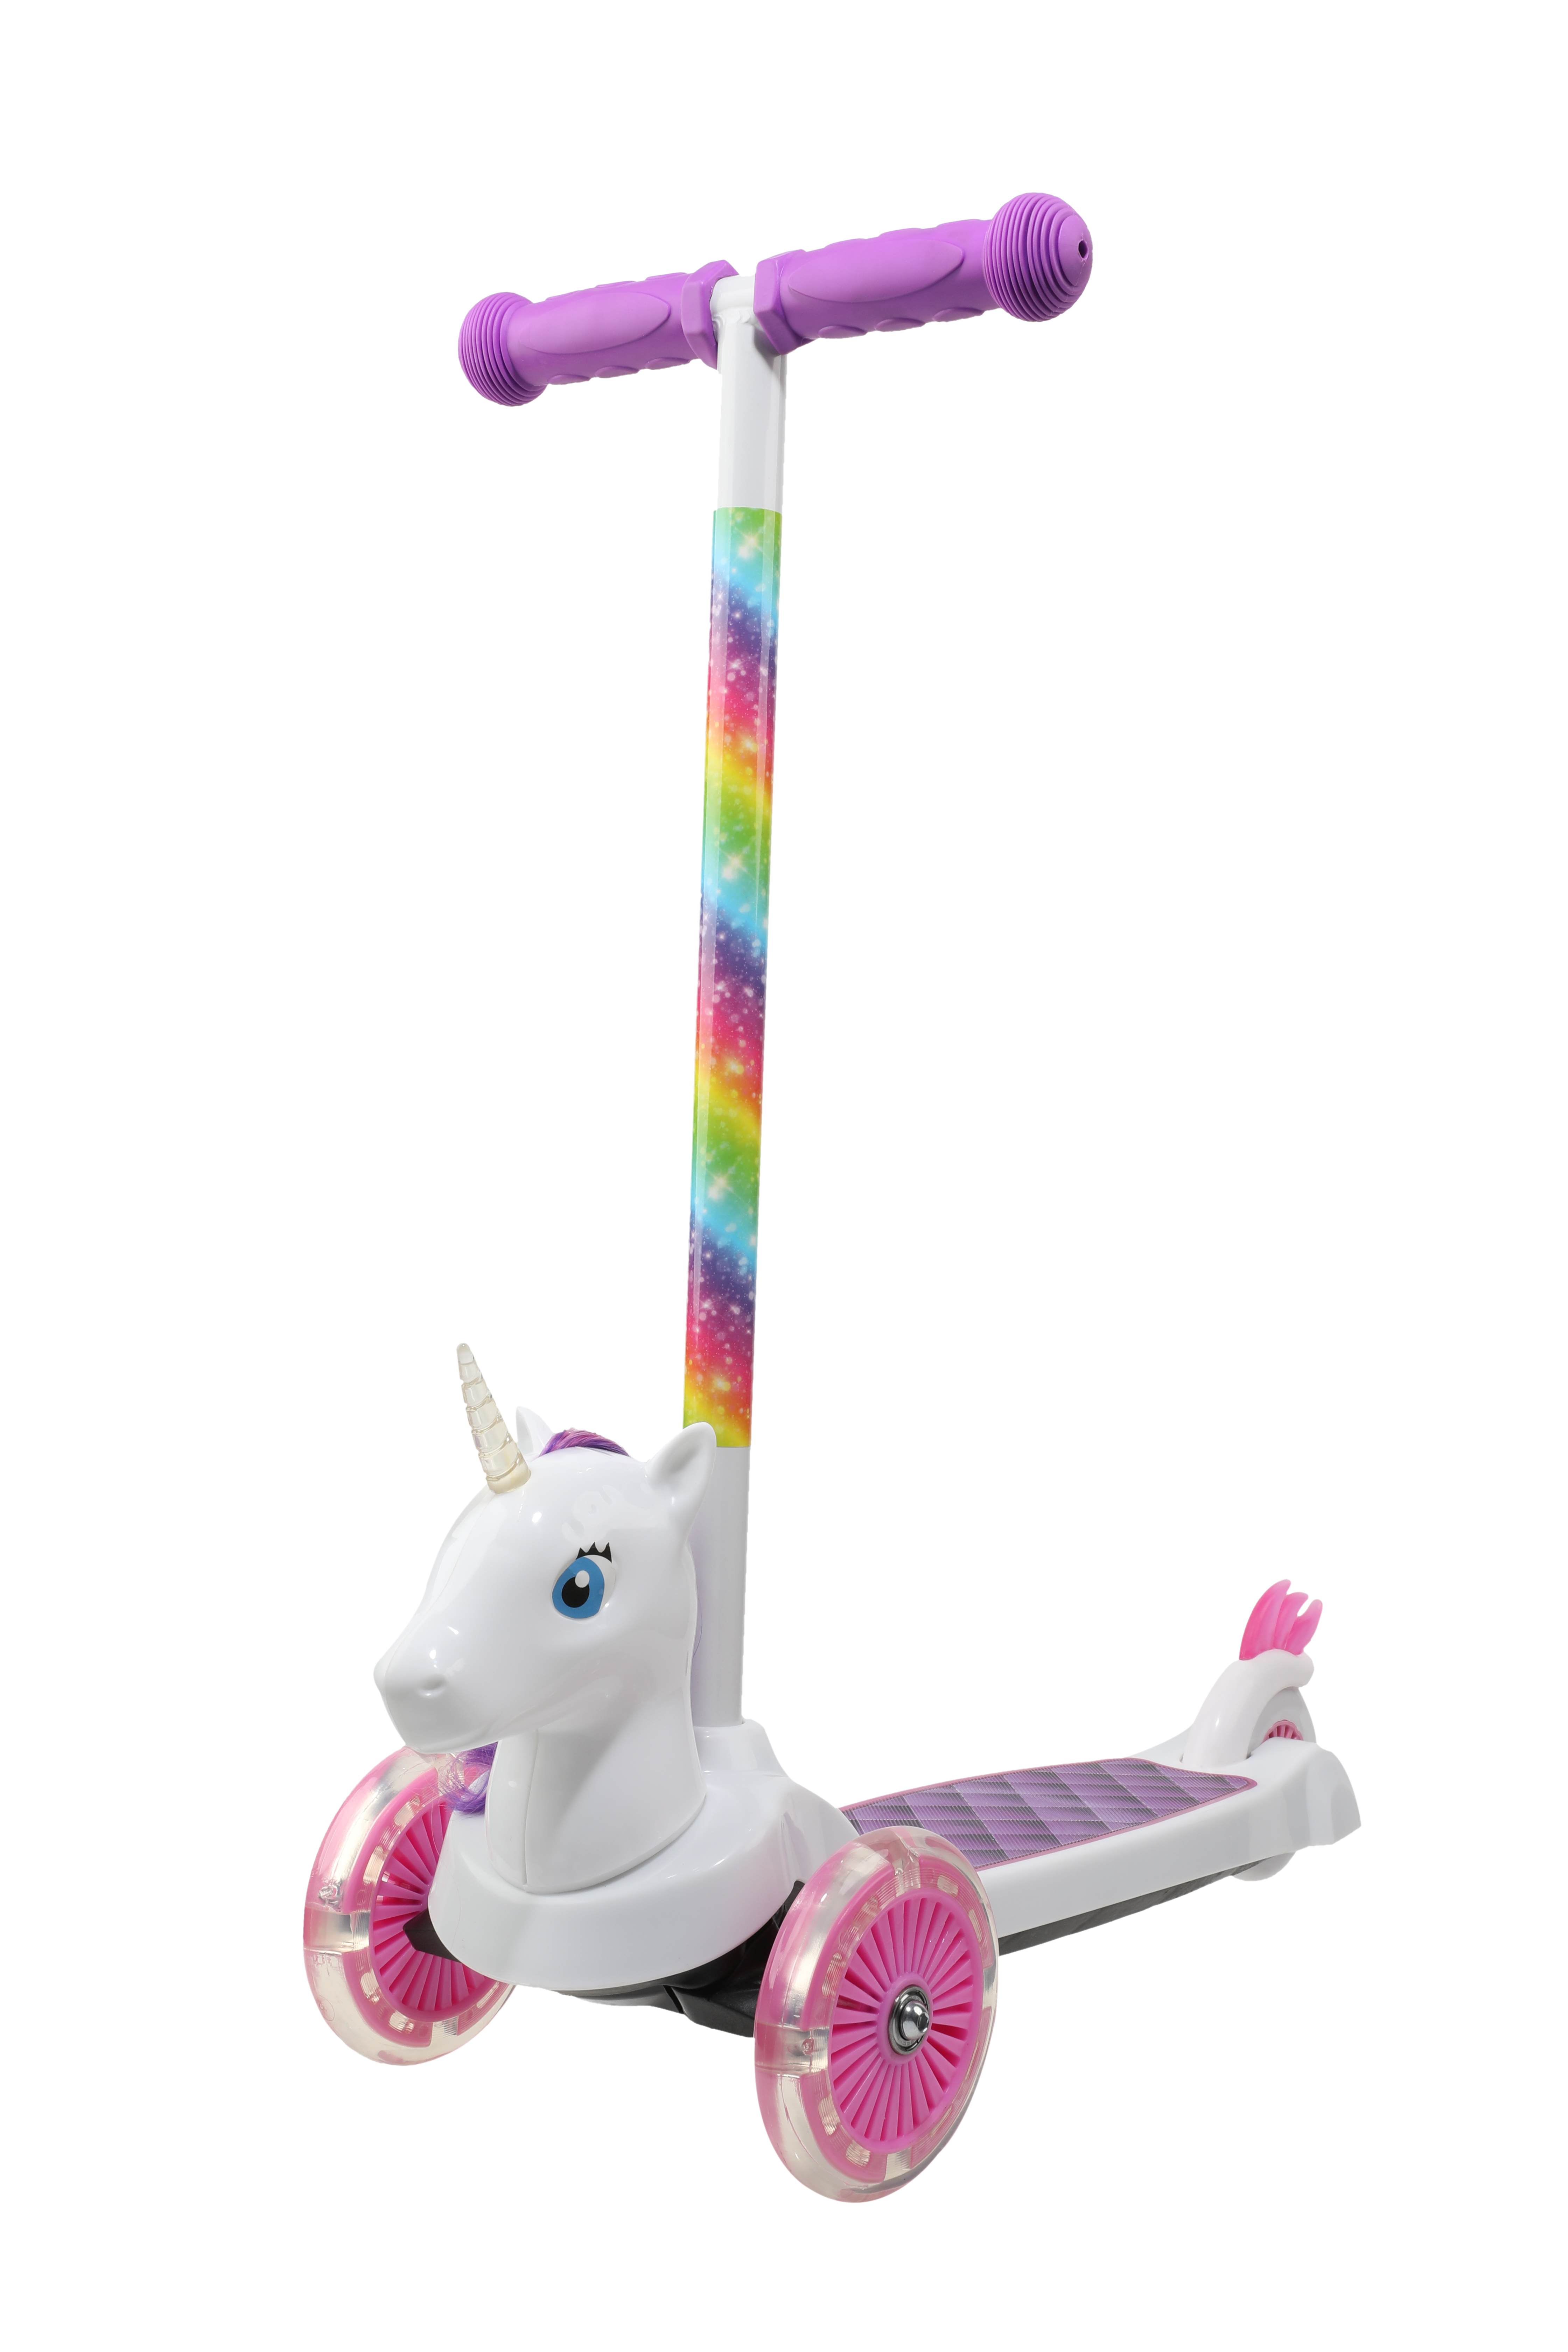 Dimensions Unicorn 3D Scooter with Light Up Wheels, Ages 3+, Max Weight 75lbs, Tilt and Turn Steering, 3-wheel Platform, Foot-Activated Brakes - image 5 of 12